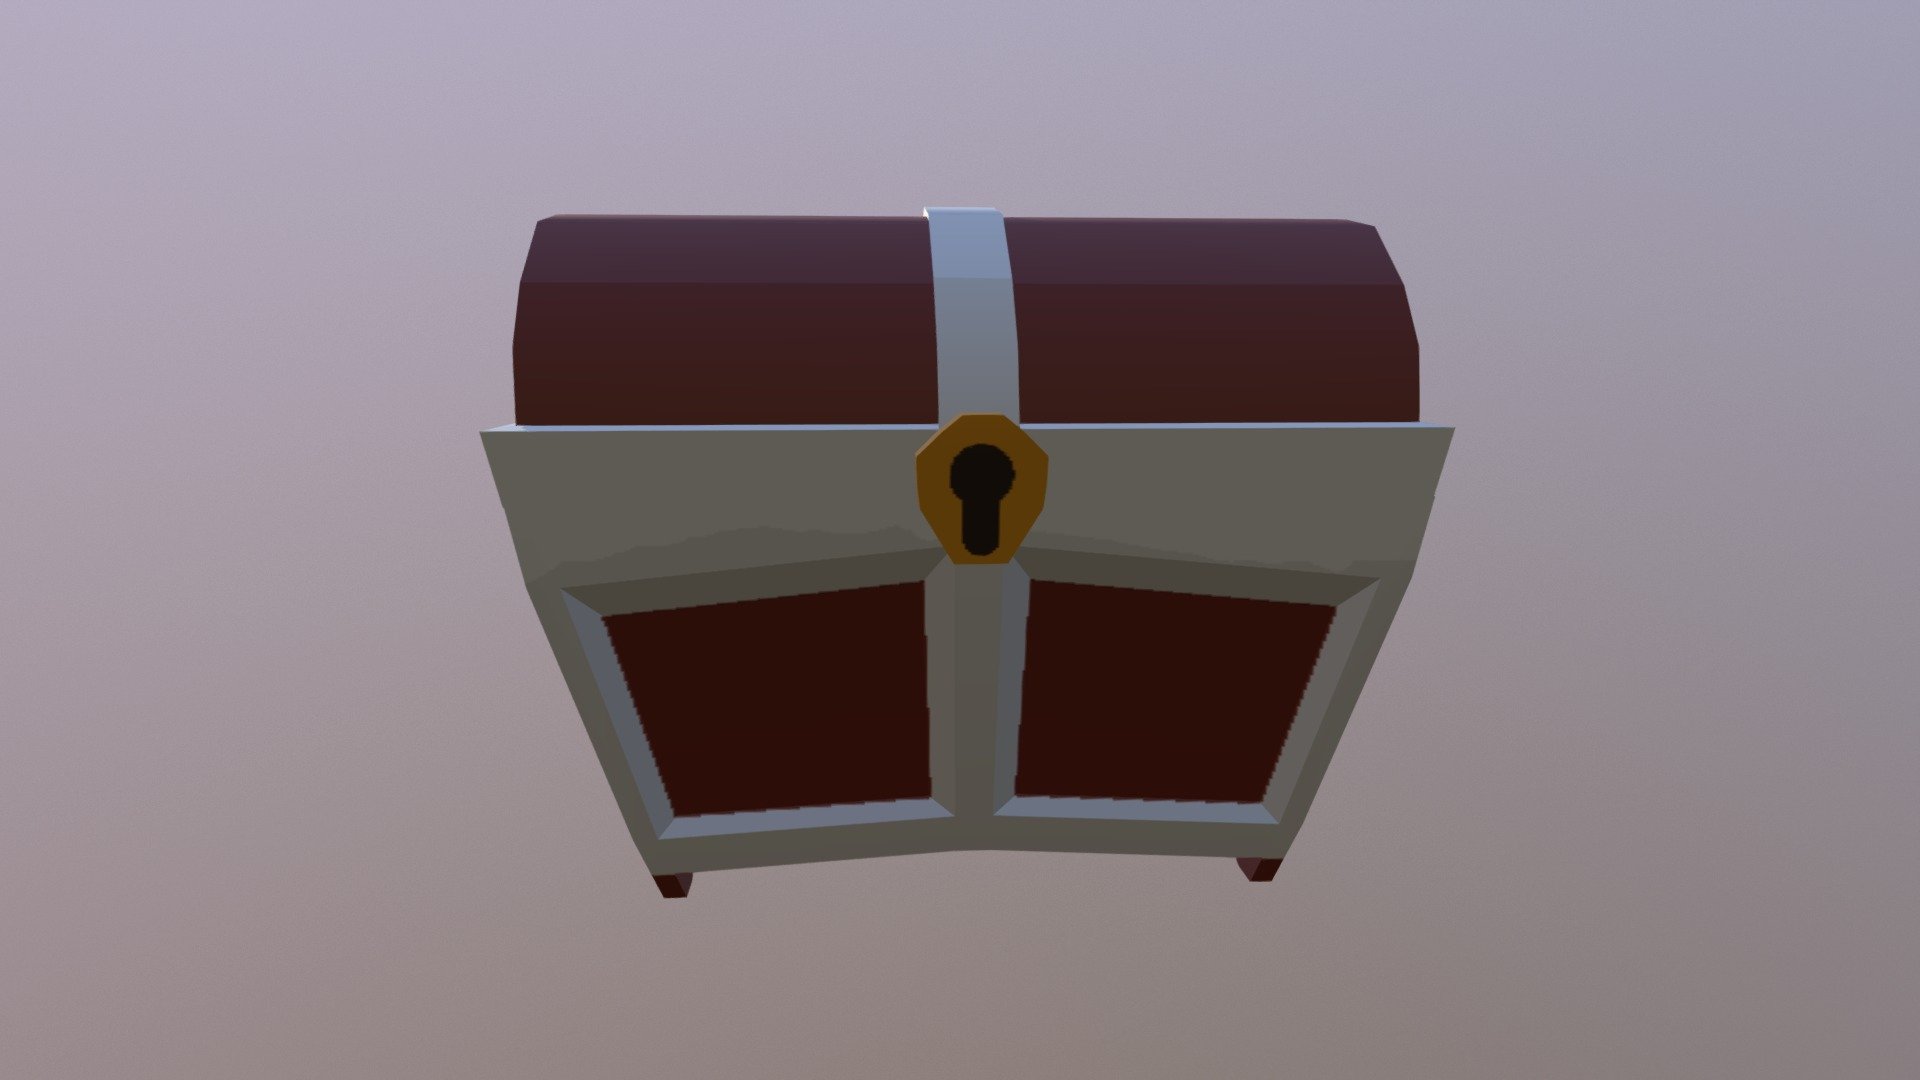 A shaking toy box/treasure chest that tell the player to interact with the toy box 3d model